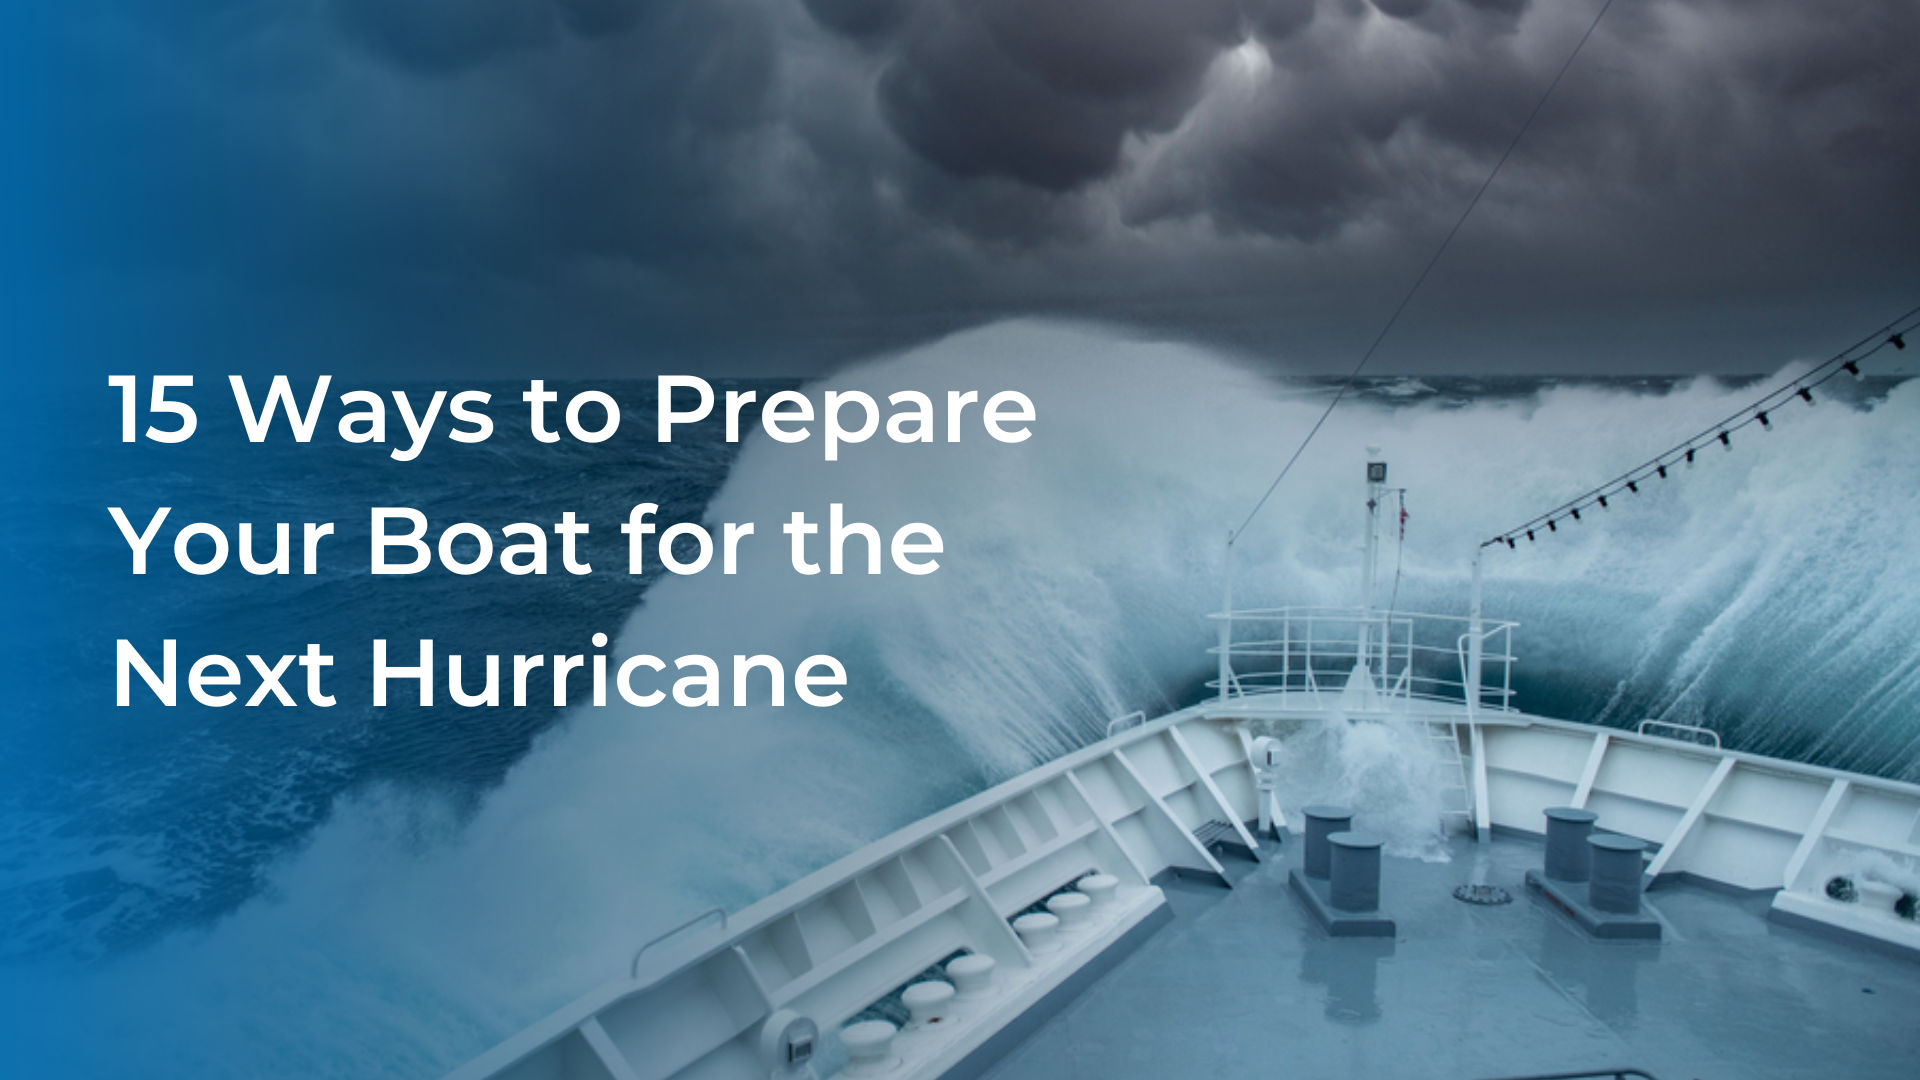 15 Ways to Prepare Your Boat for the Next Hurricane